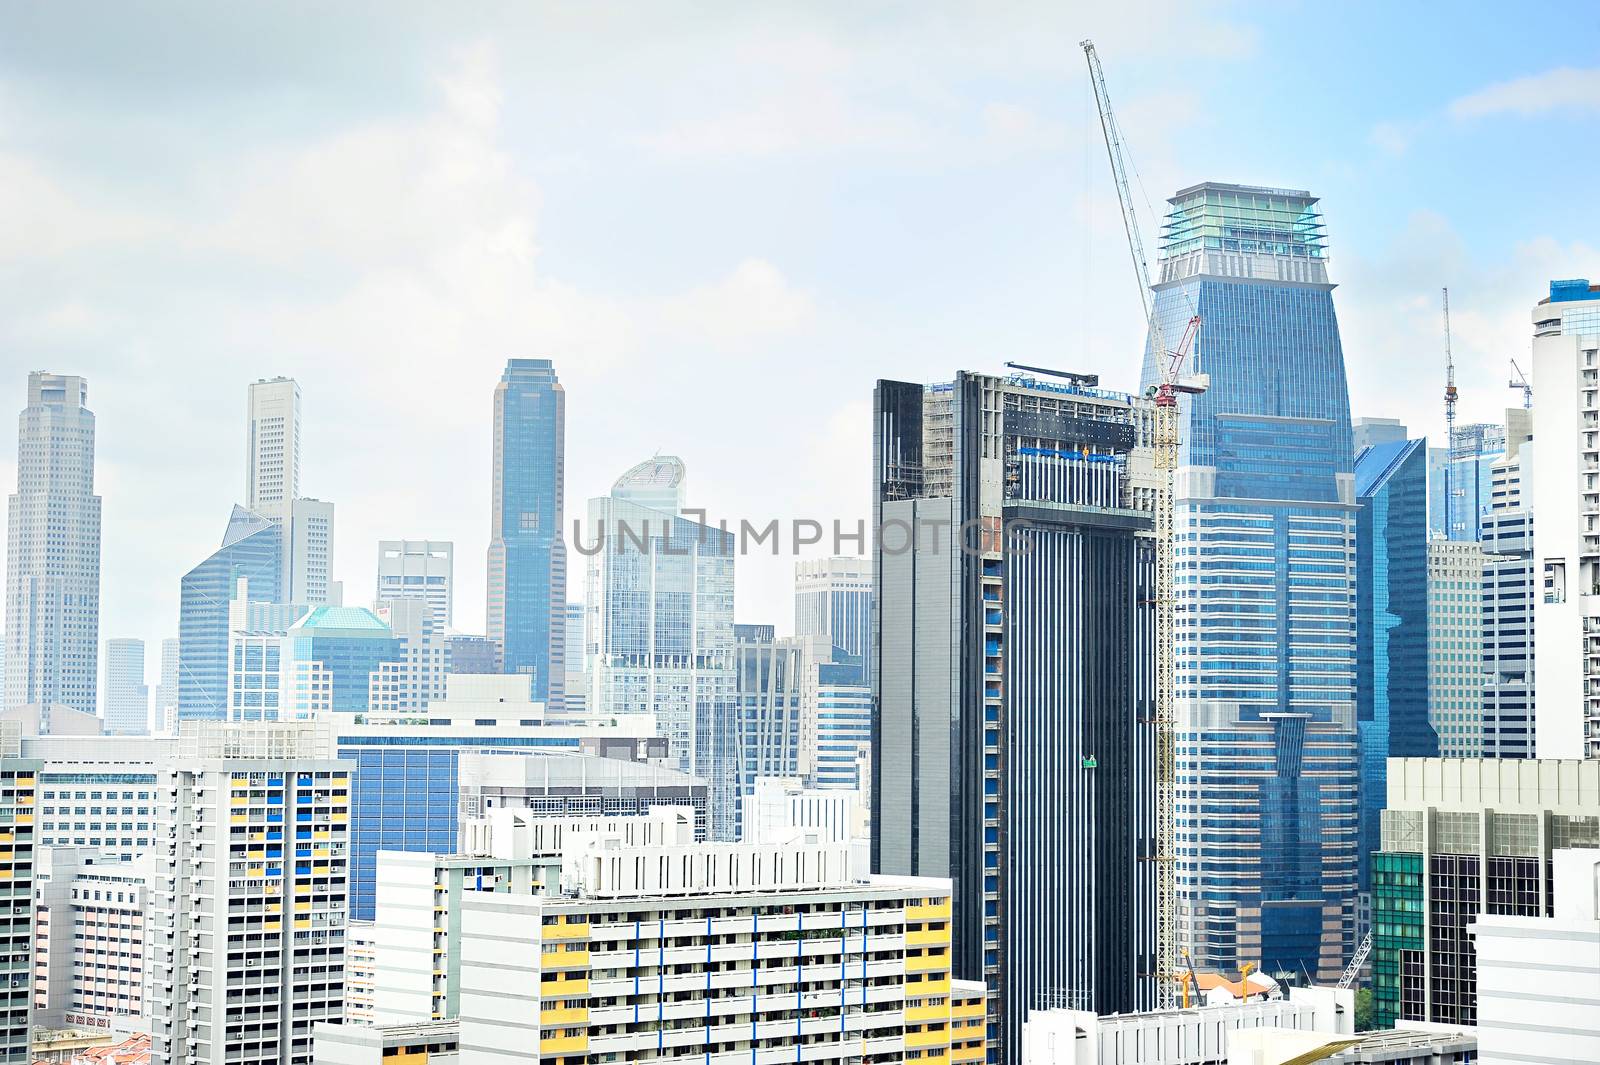 Skyline of Singapore downtown with a construction site on foreground